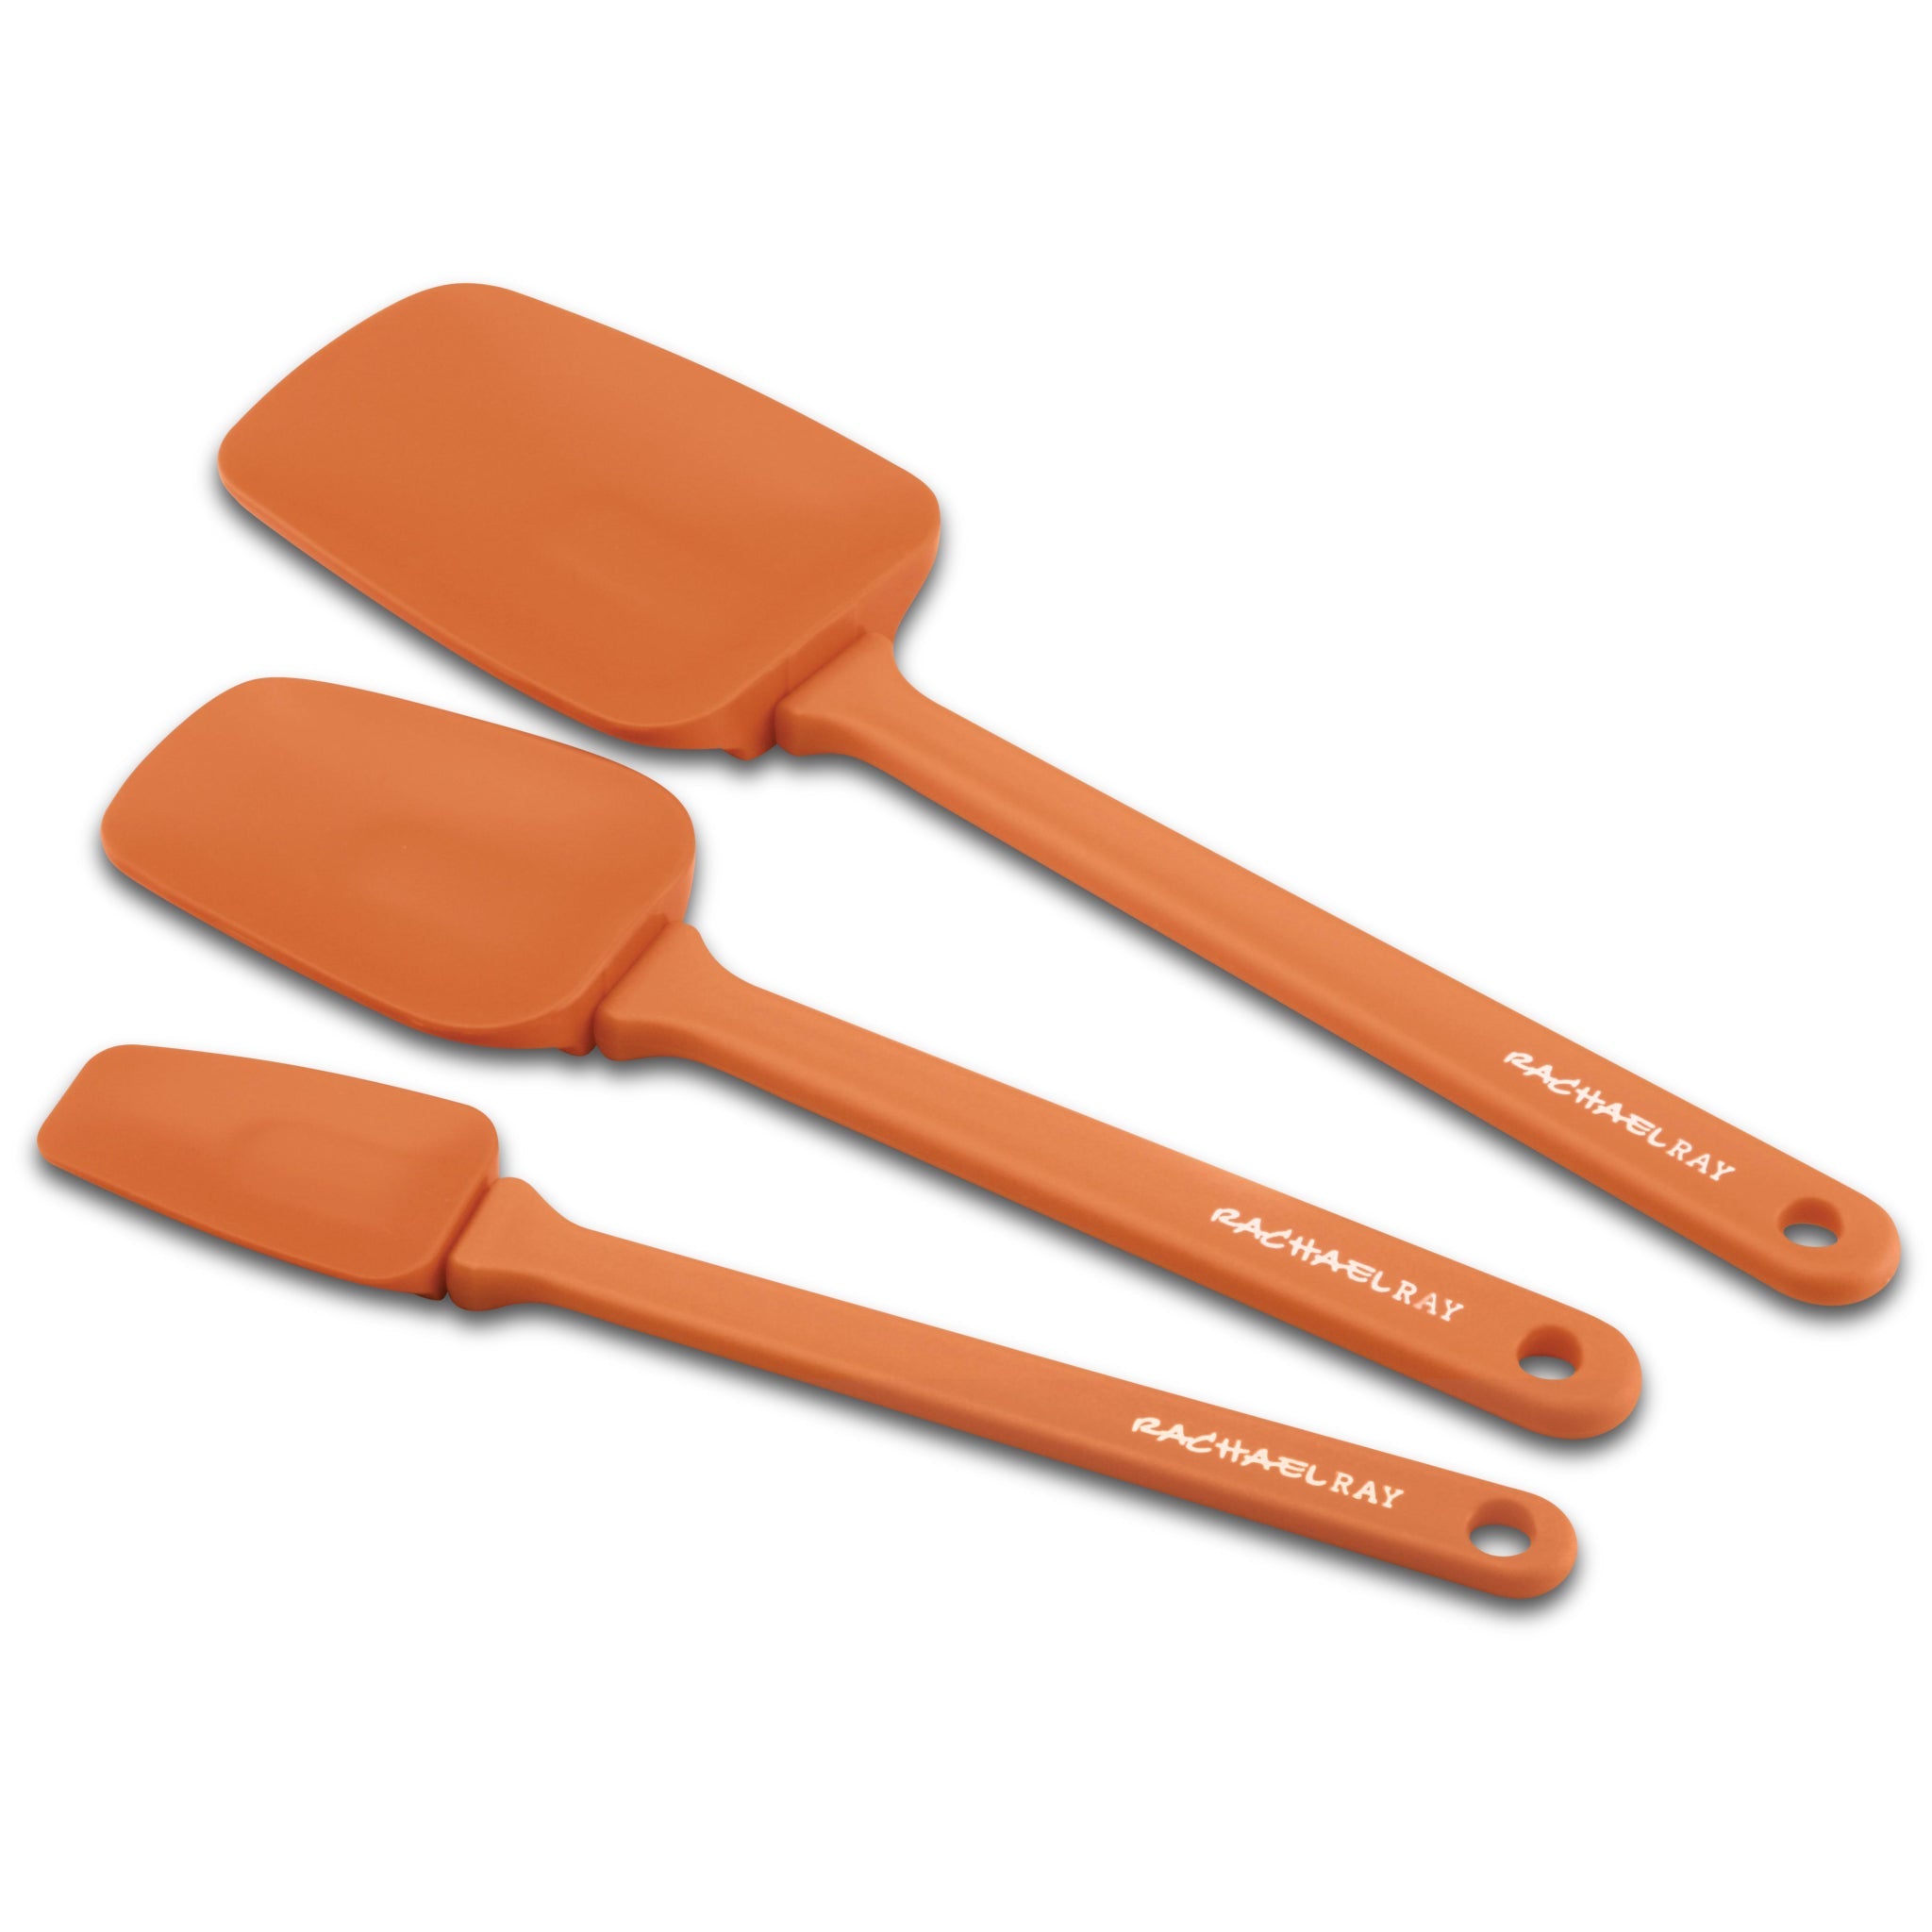 Rachael Ray Tools and Gadgets Lazy Crush & Chop, Flexi Turner, and Scraping Spoon Set, Gray